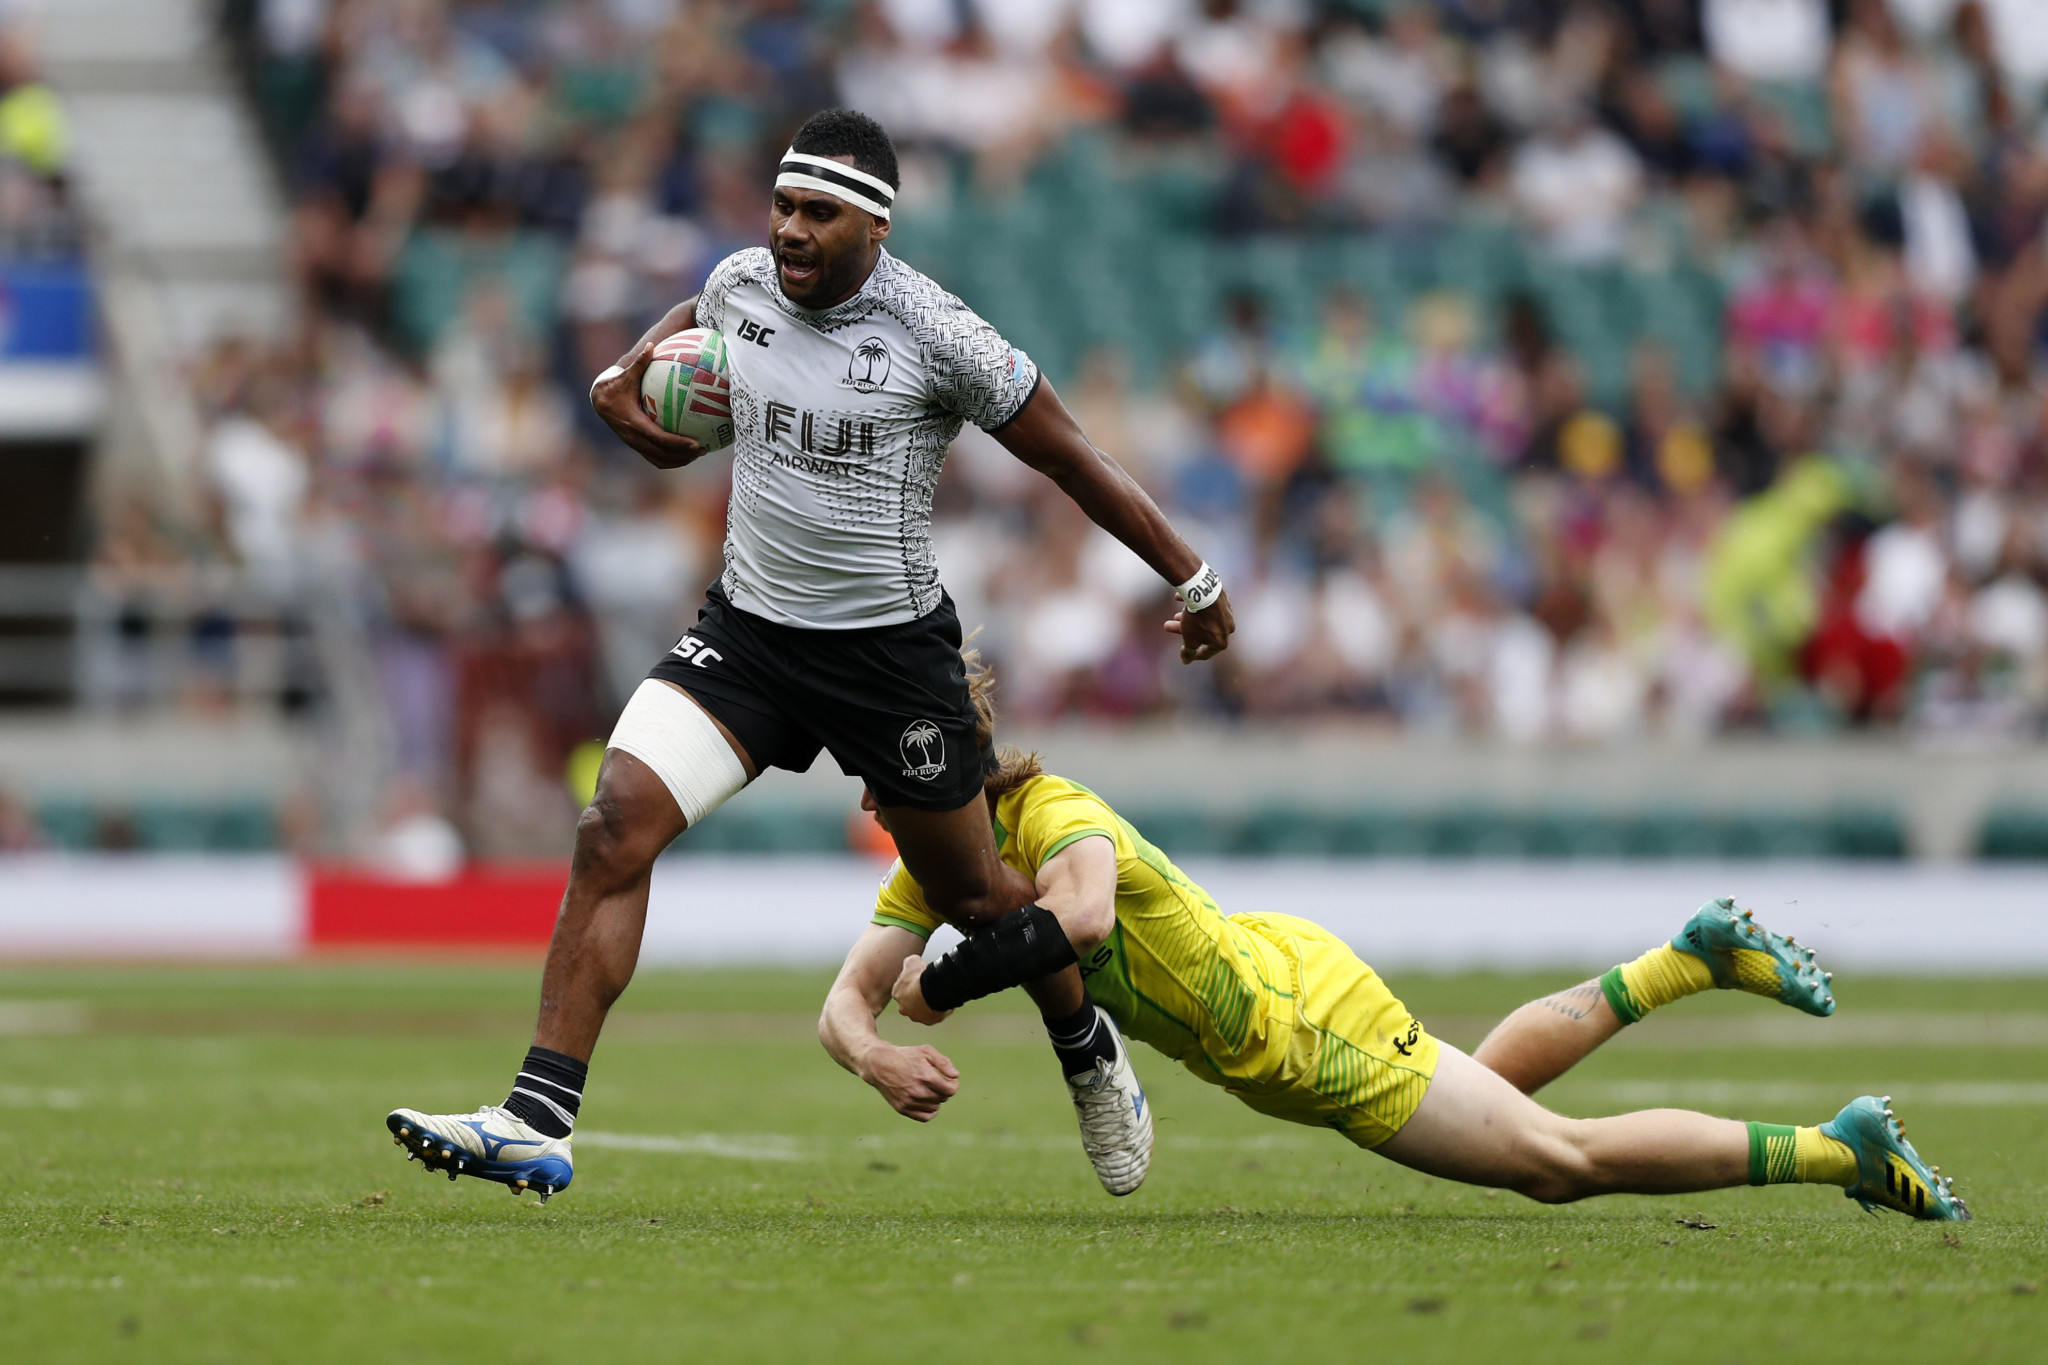 Olympic champions Fiji take overall lead with victory at World Rugby Sevens Series in London